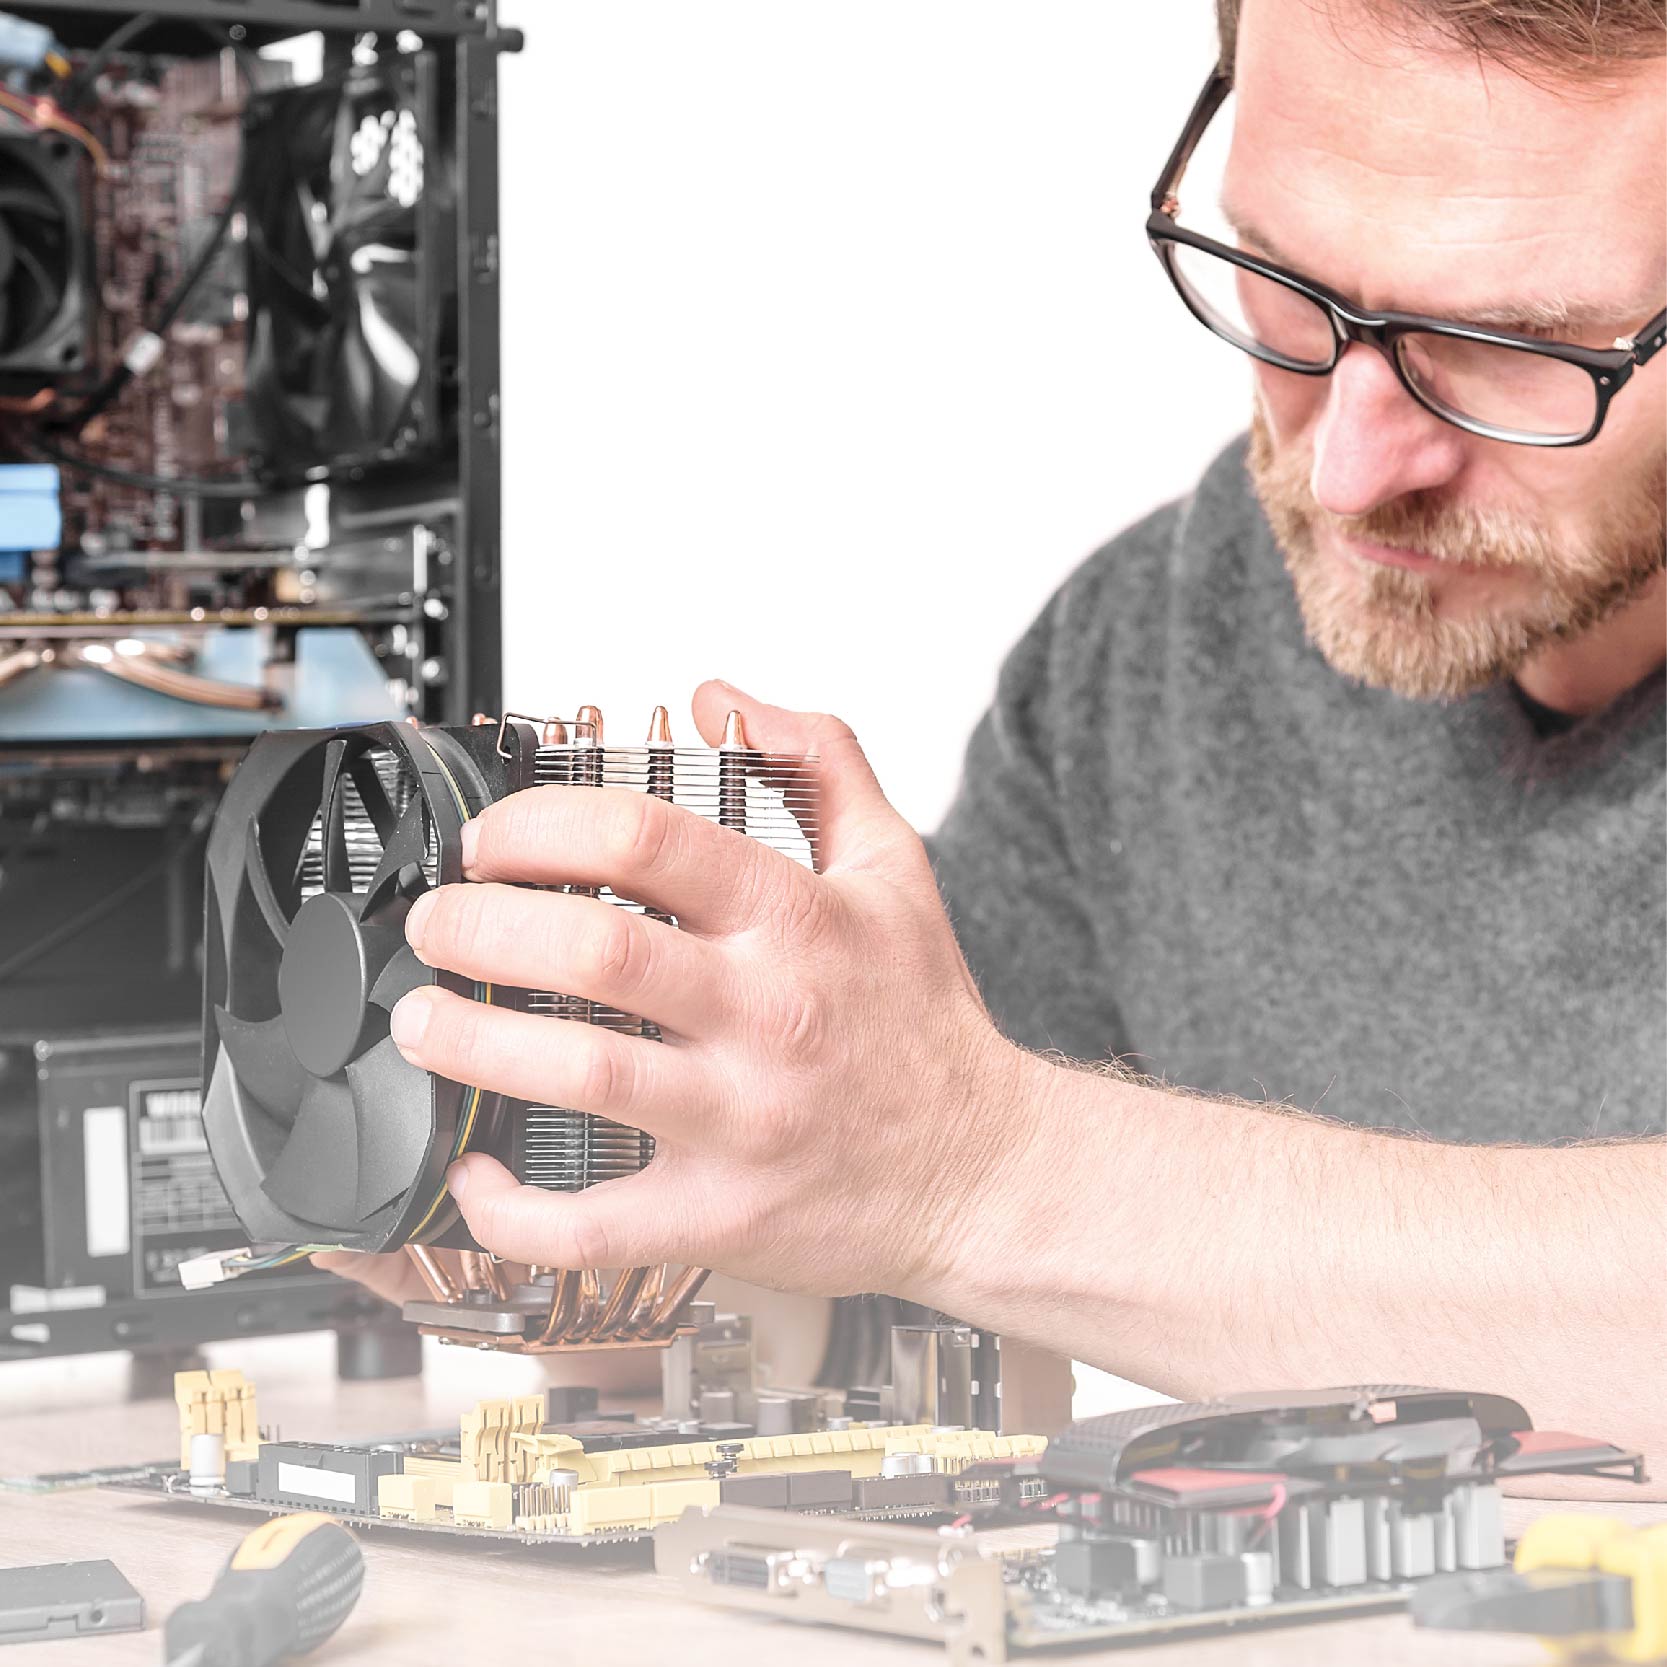 Man builds computer with 3D printed computer parts.